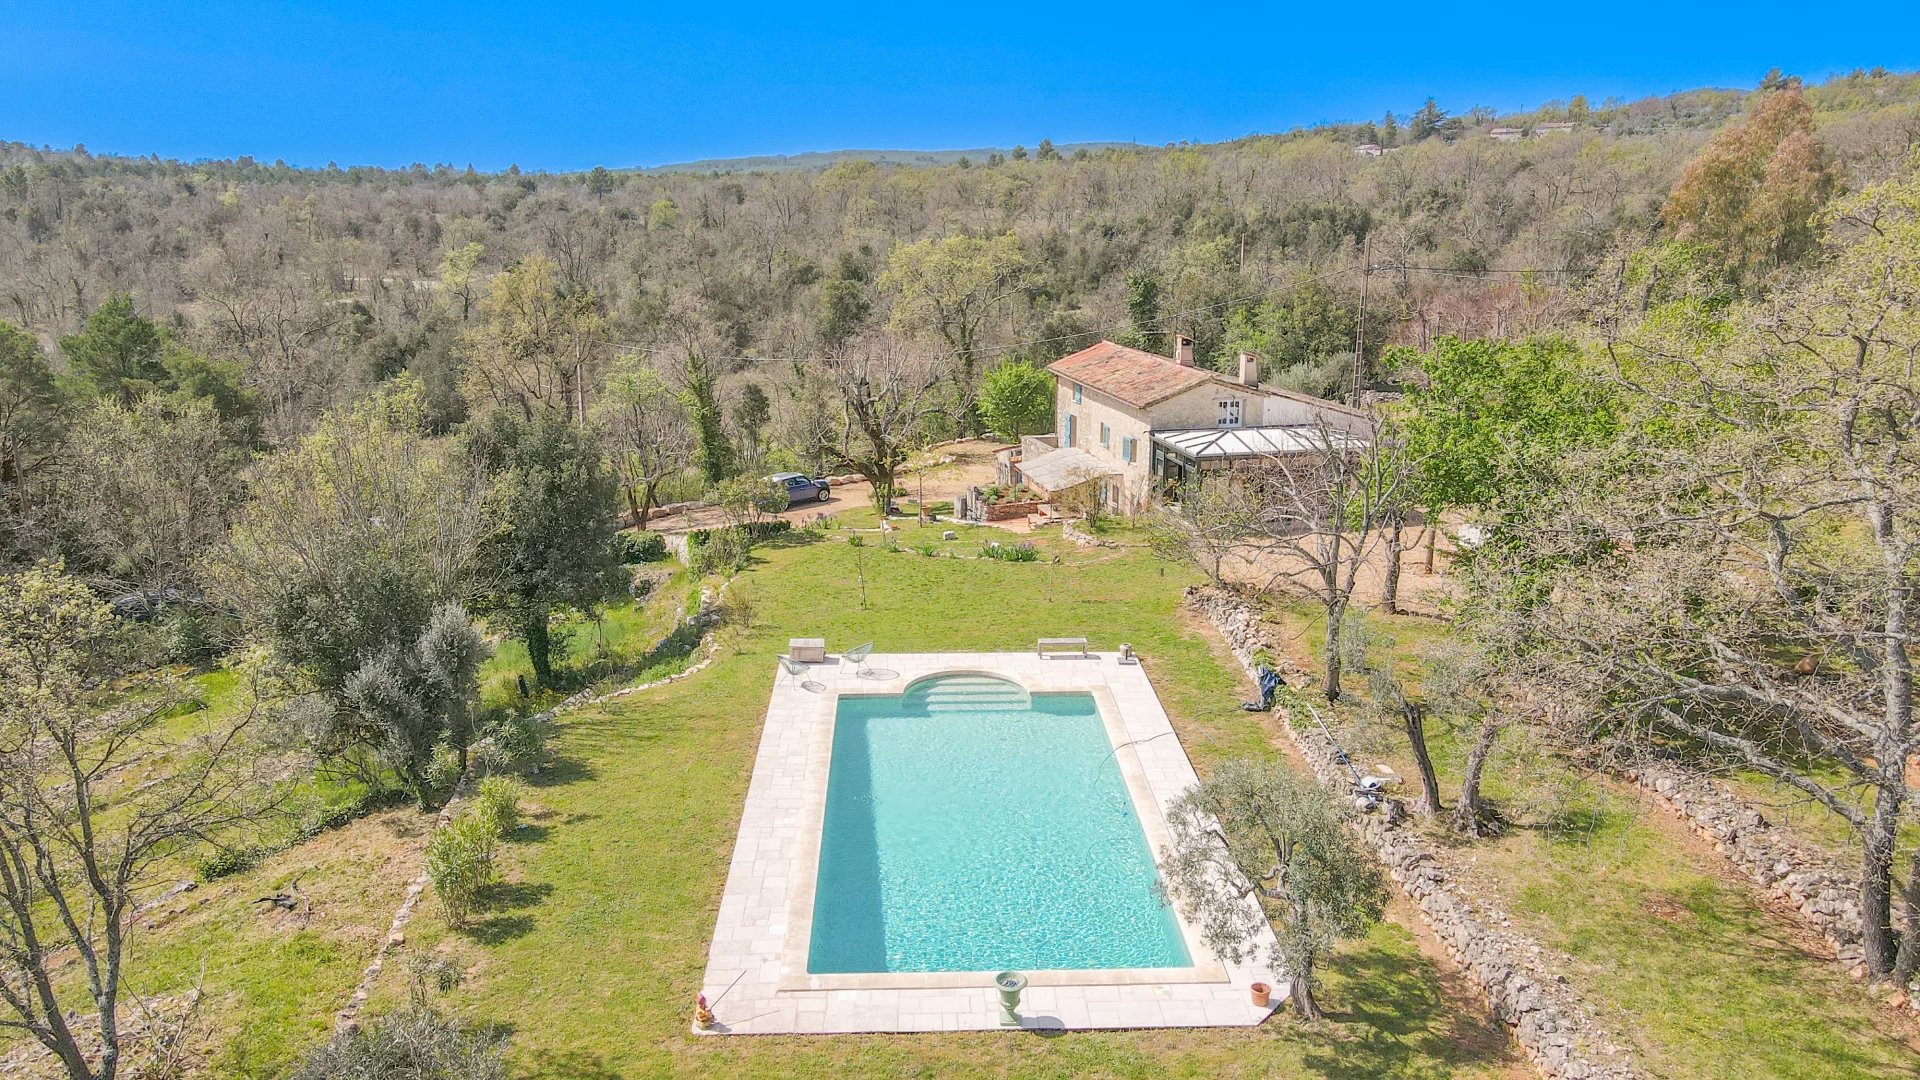 Pays de Fayence : Magnificent farmhouse on large plot of land, in a peaceful setting